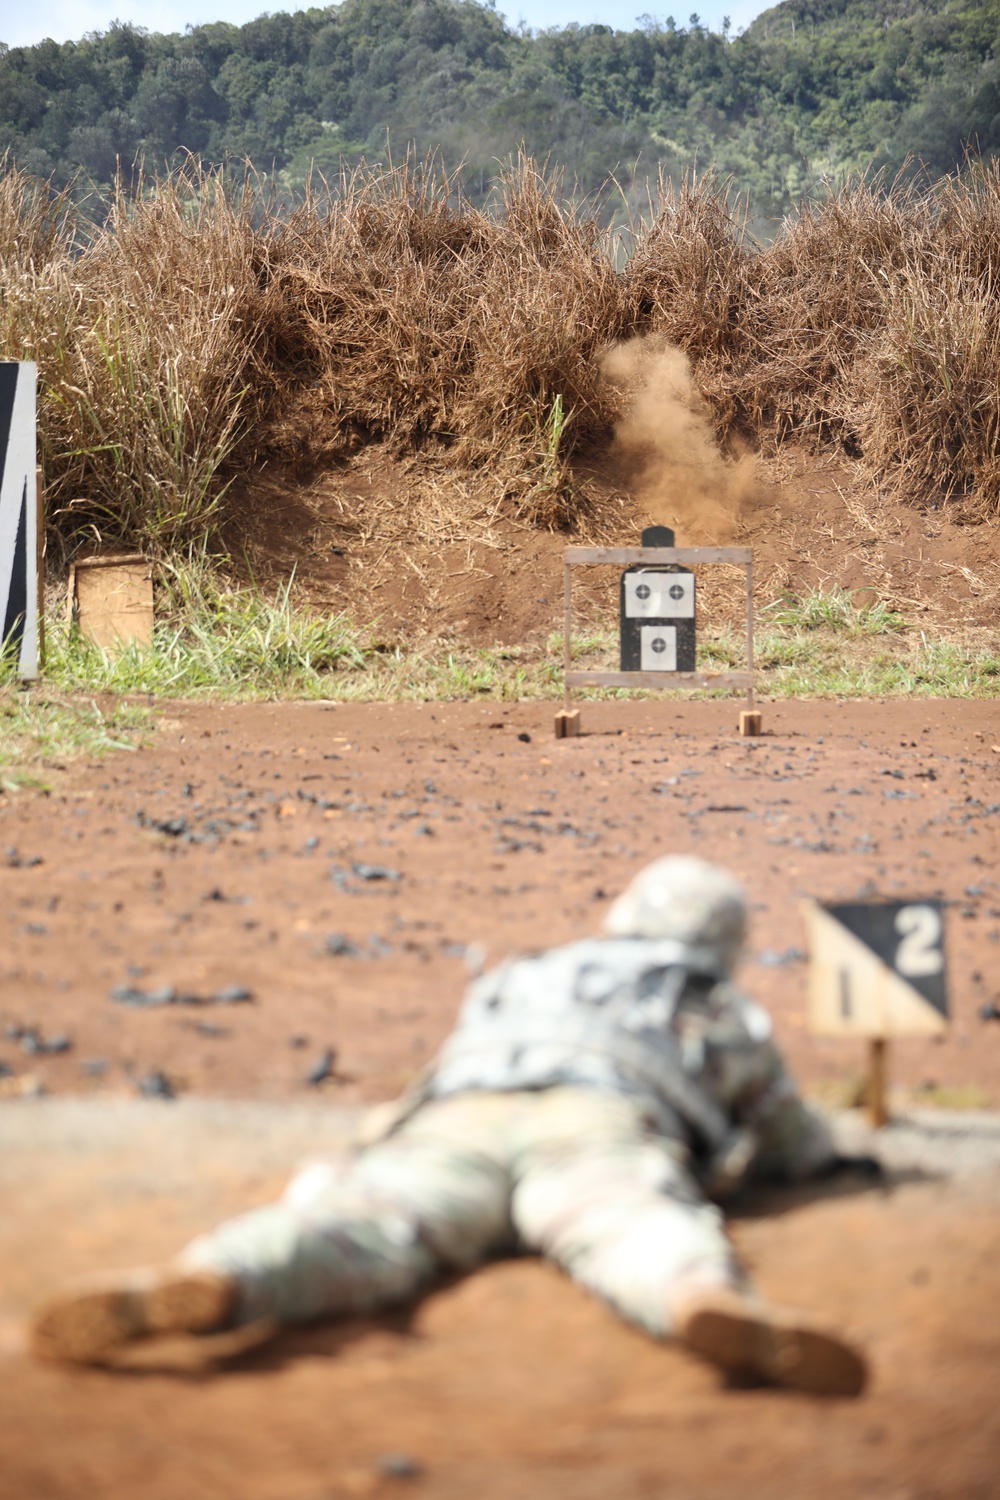 Army BWC, USARPAC NCO at the range